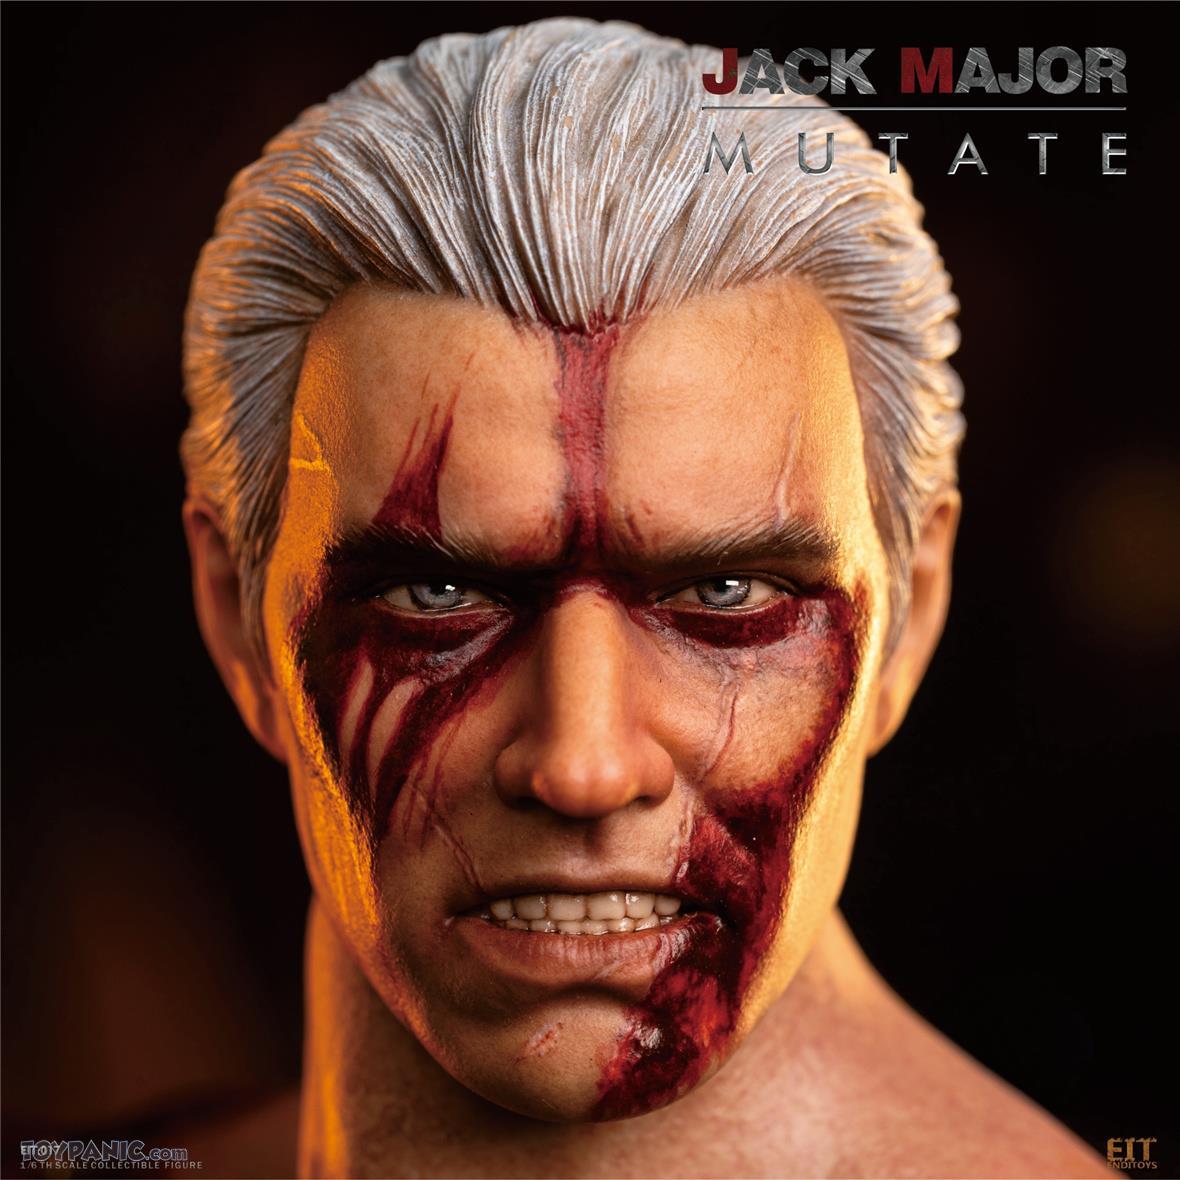 enditoys - NEW PRODUCT:  1/6 Jack Major Mutate from End I Toys  2732024105953AM_5878206